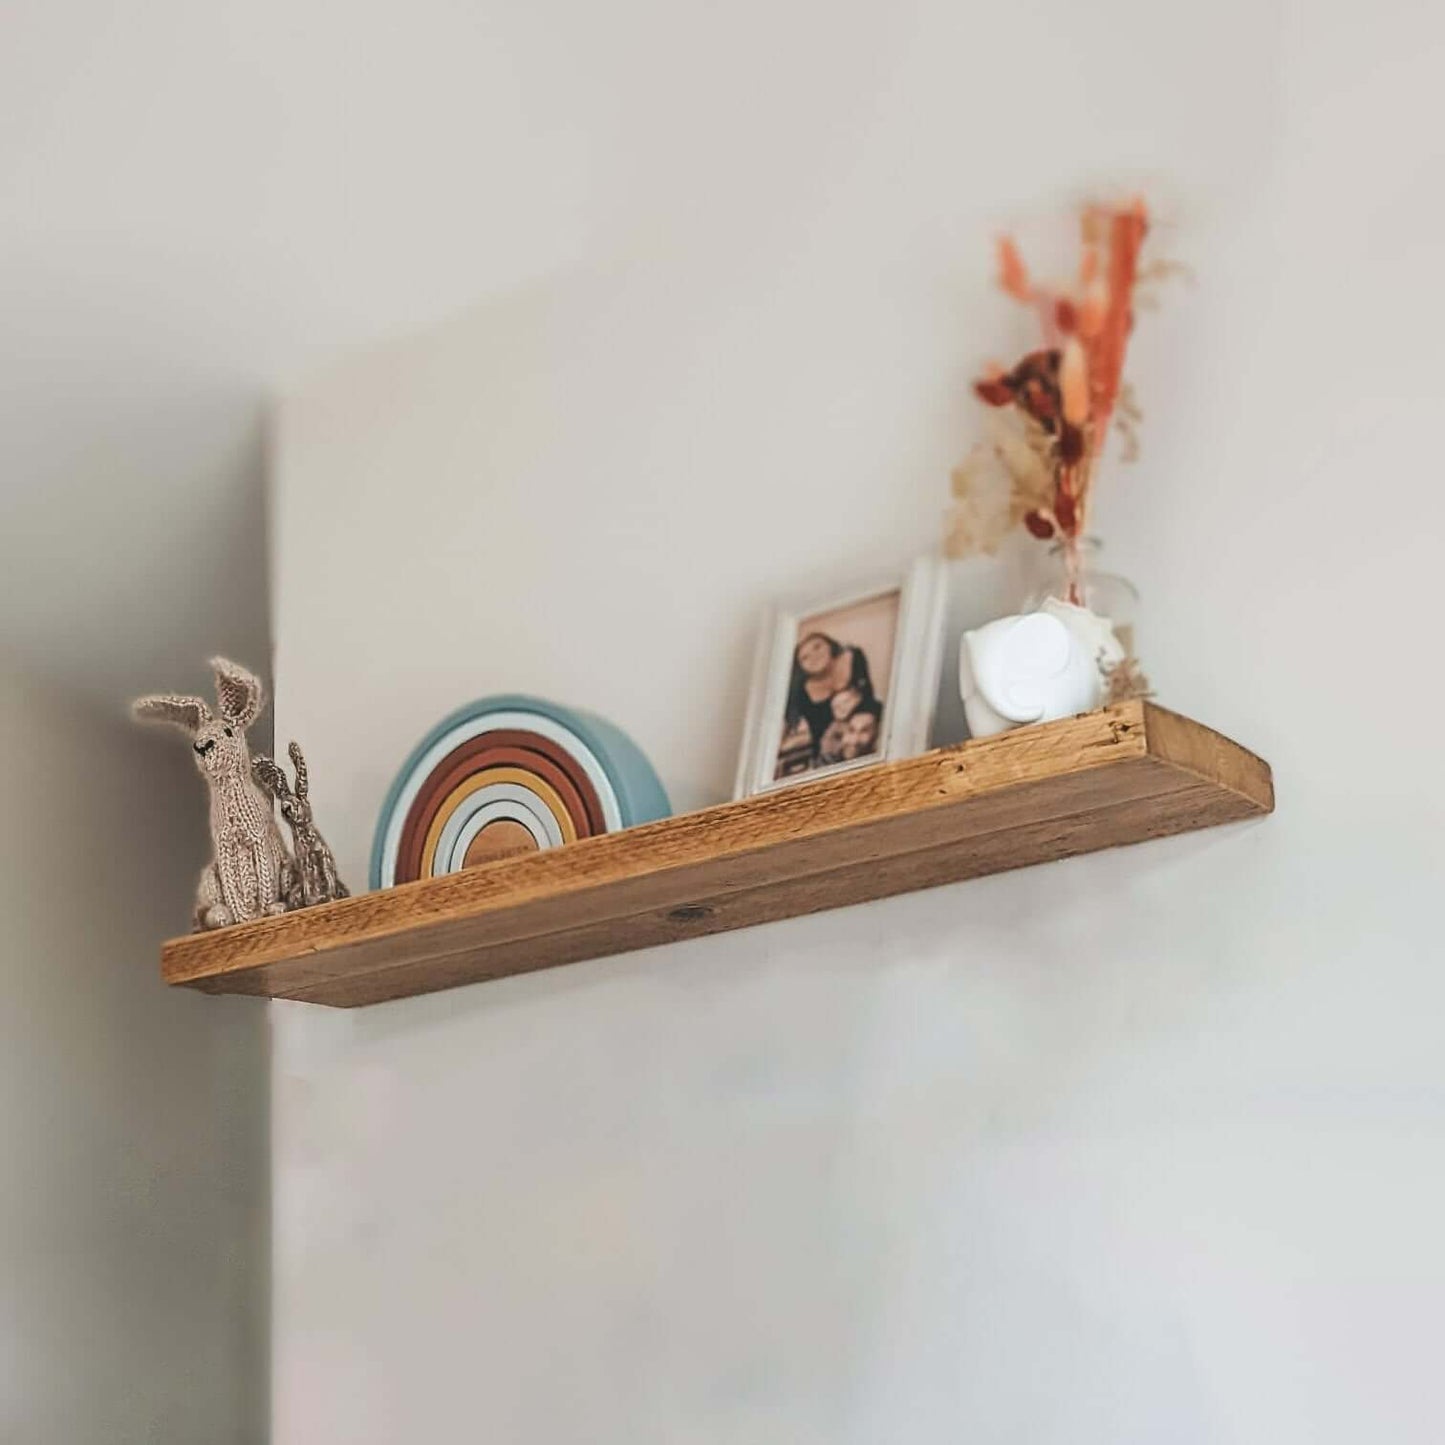 Solid Wood Floating Shelves - 120 cm by 20 cm